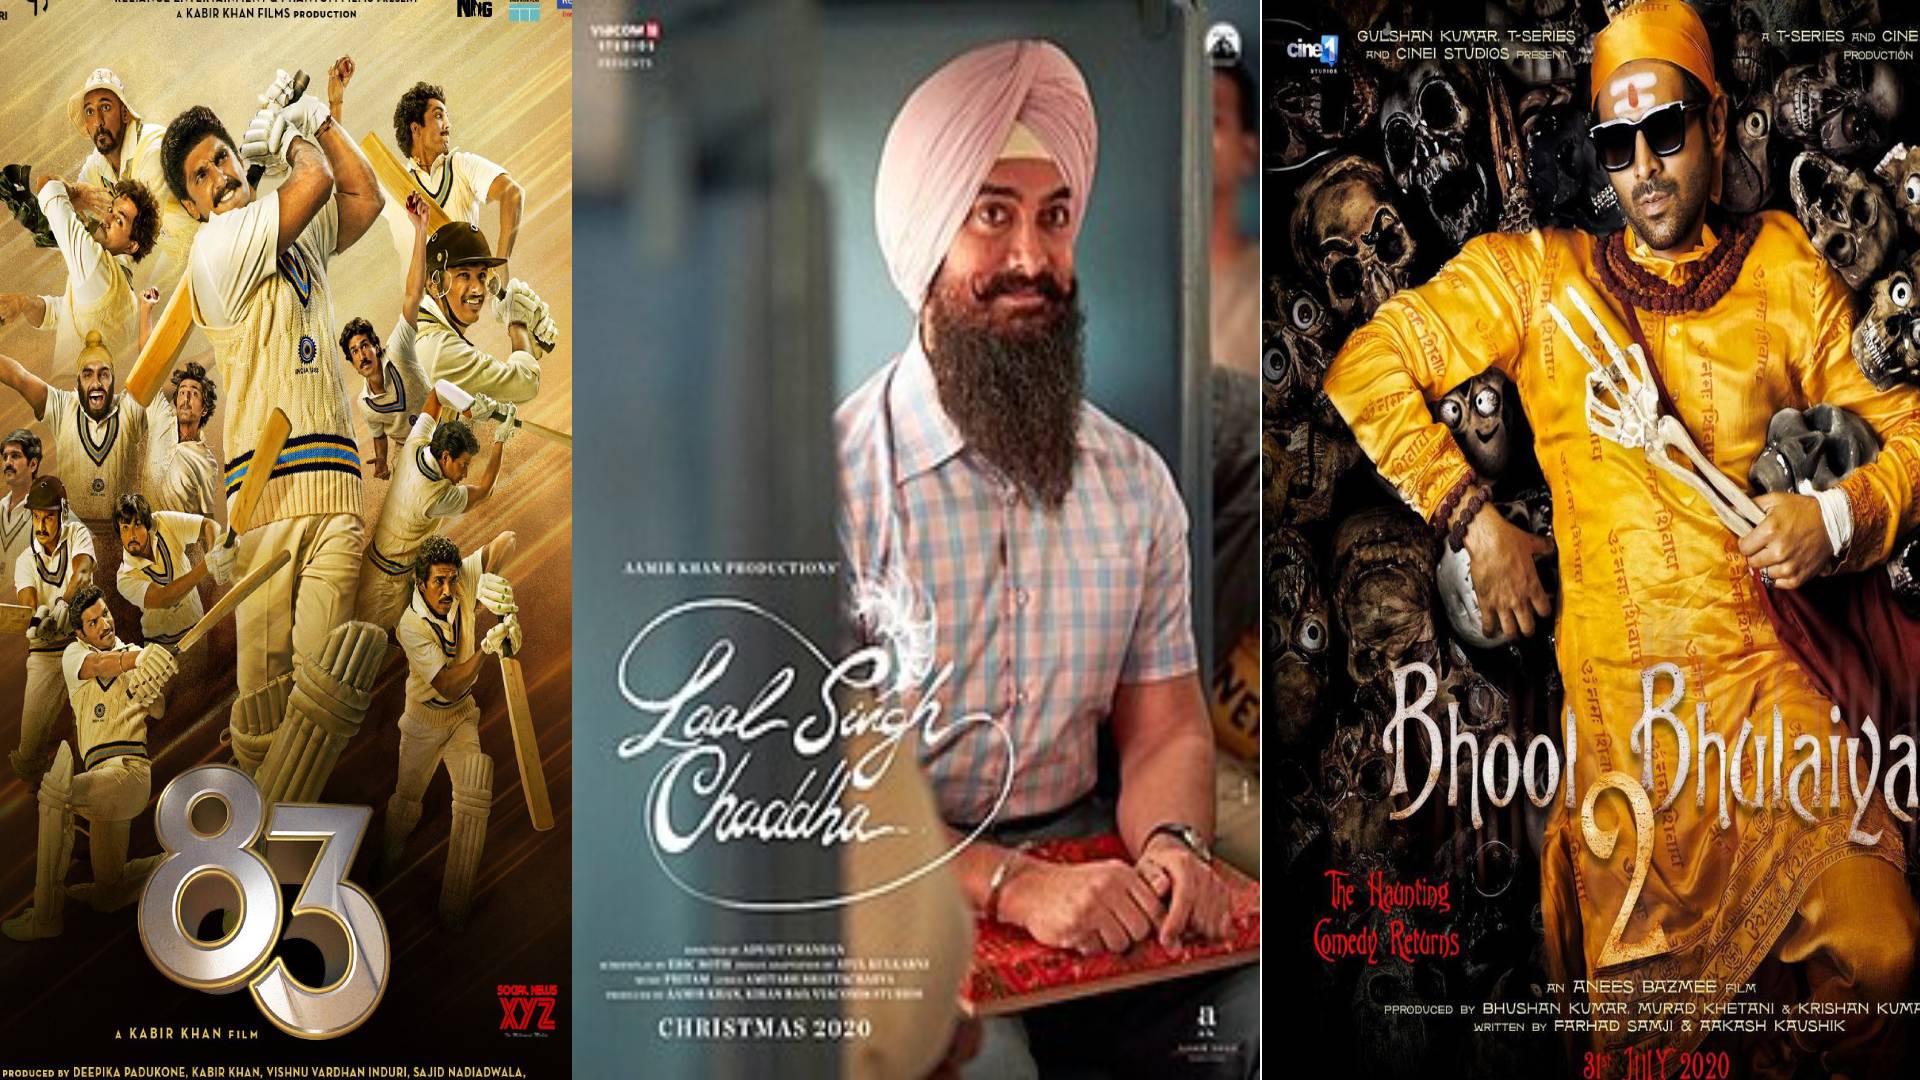 Top 5 upcoming must watch Bollywood films of 2020